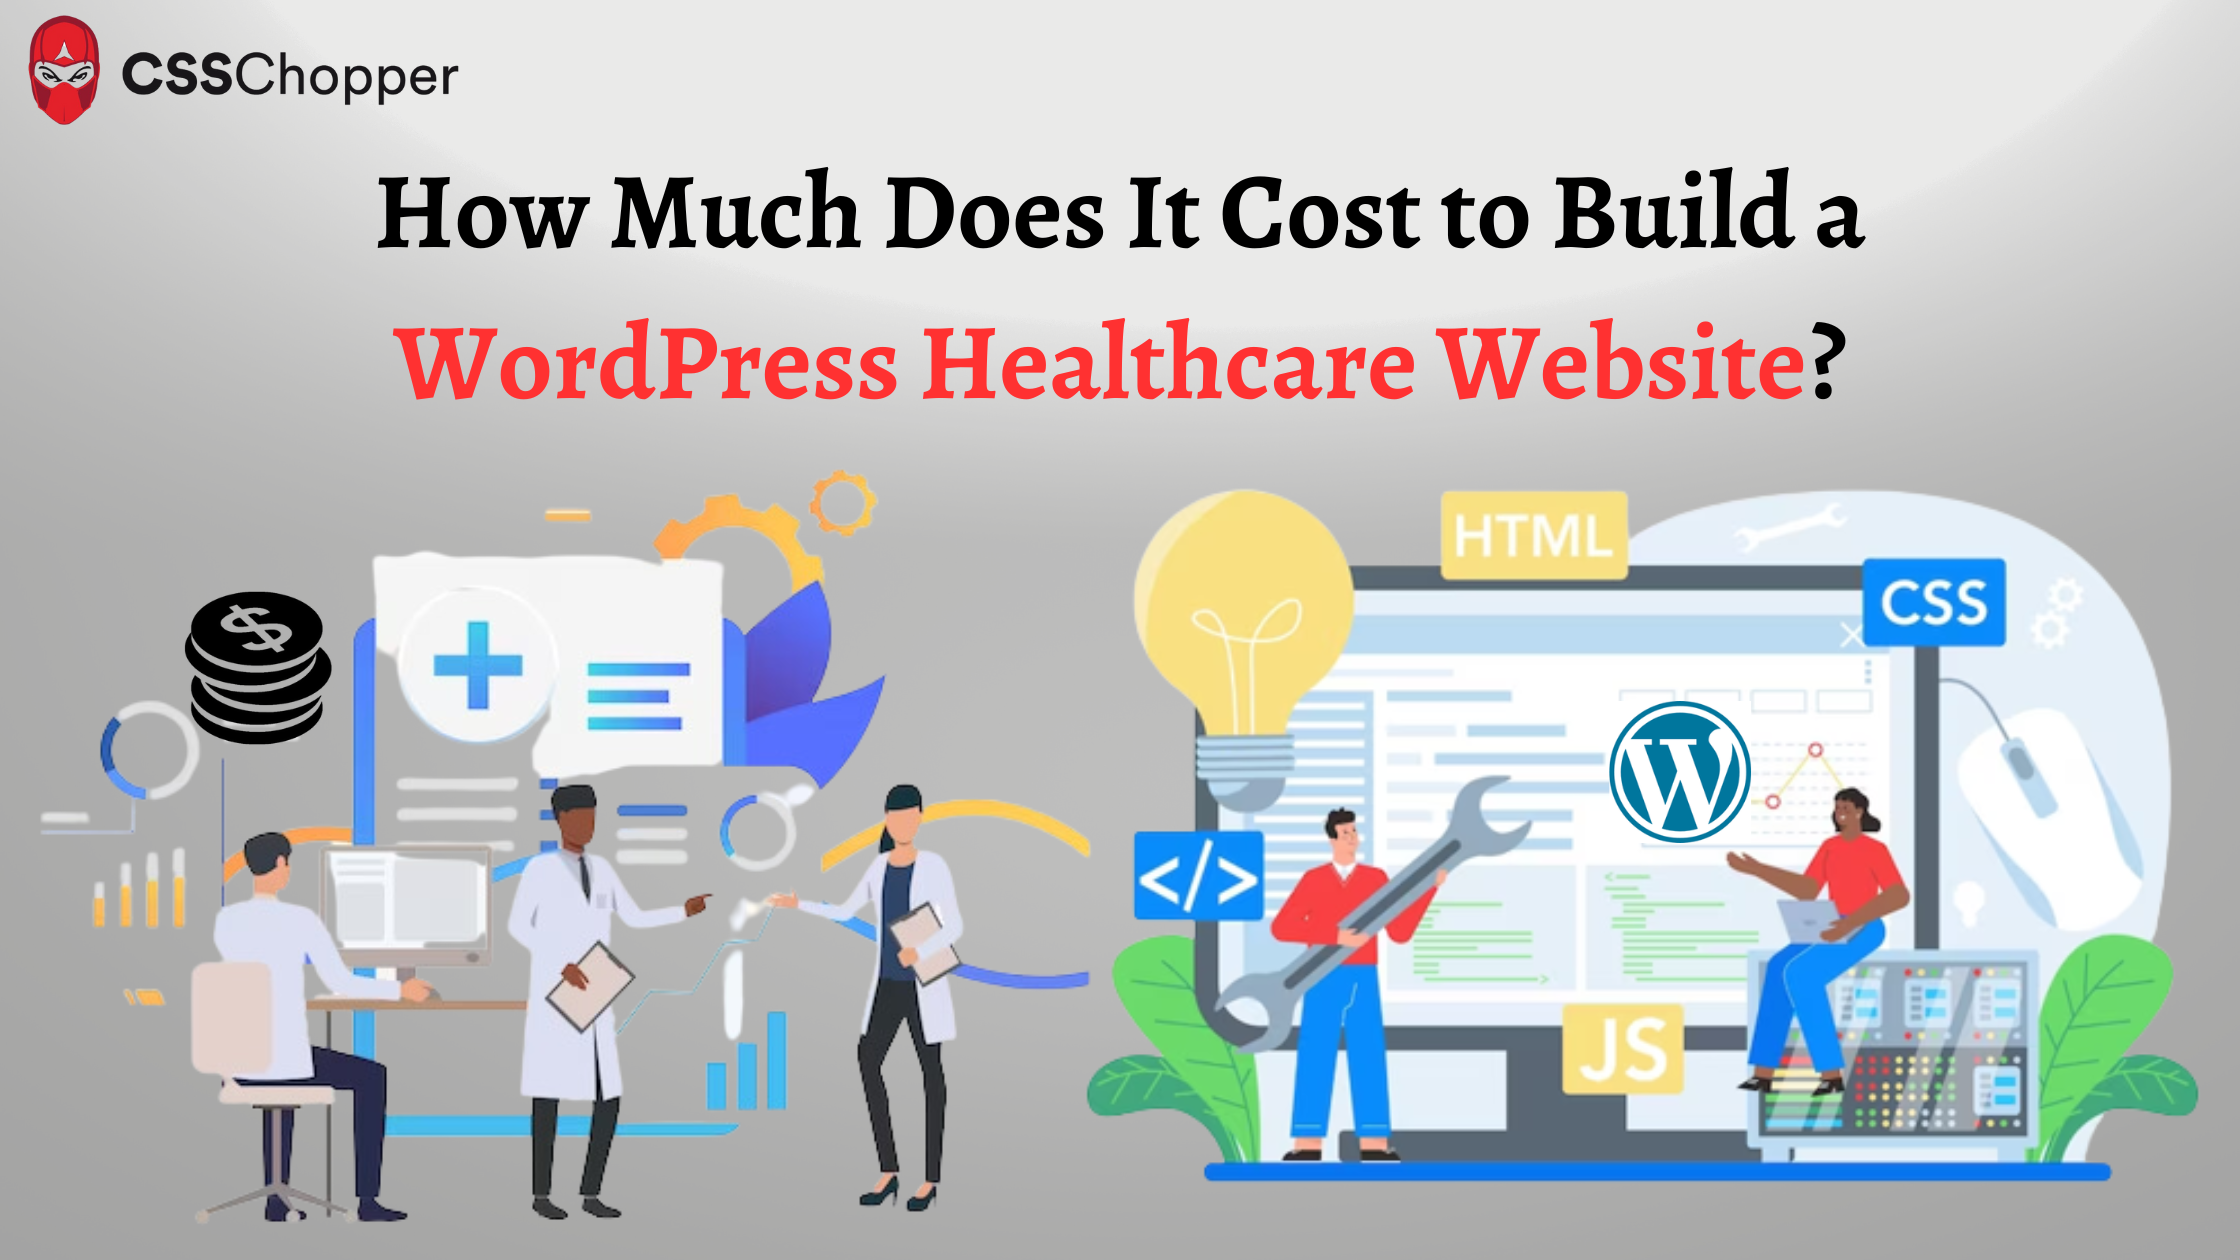 How Much Does It Cost to Build a WordPress Healthcare Website?